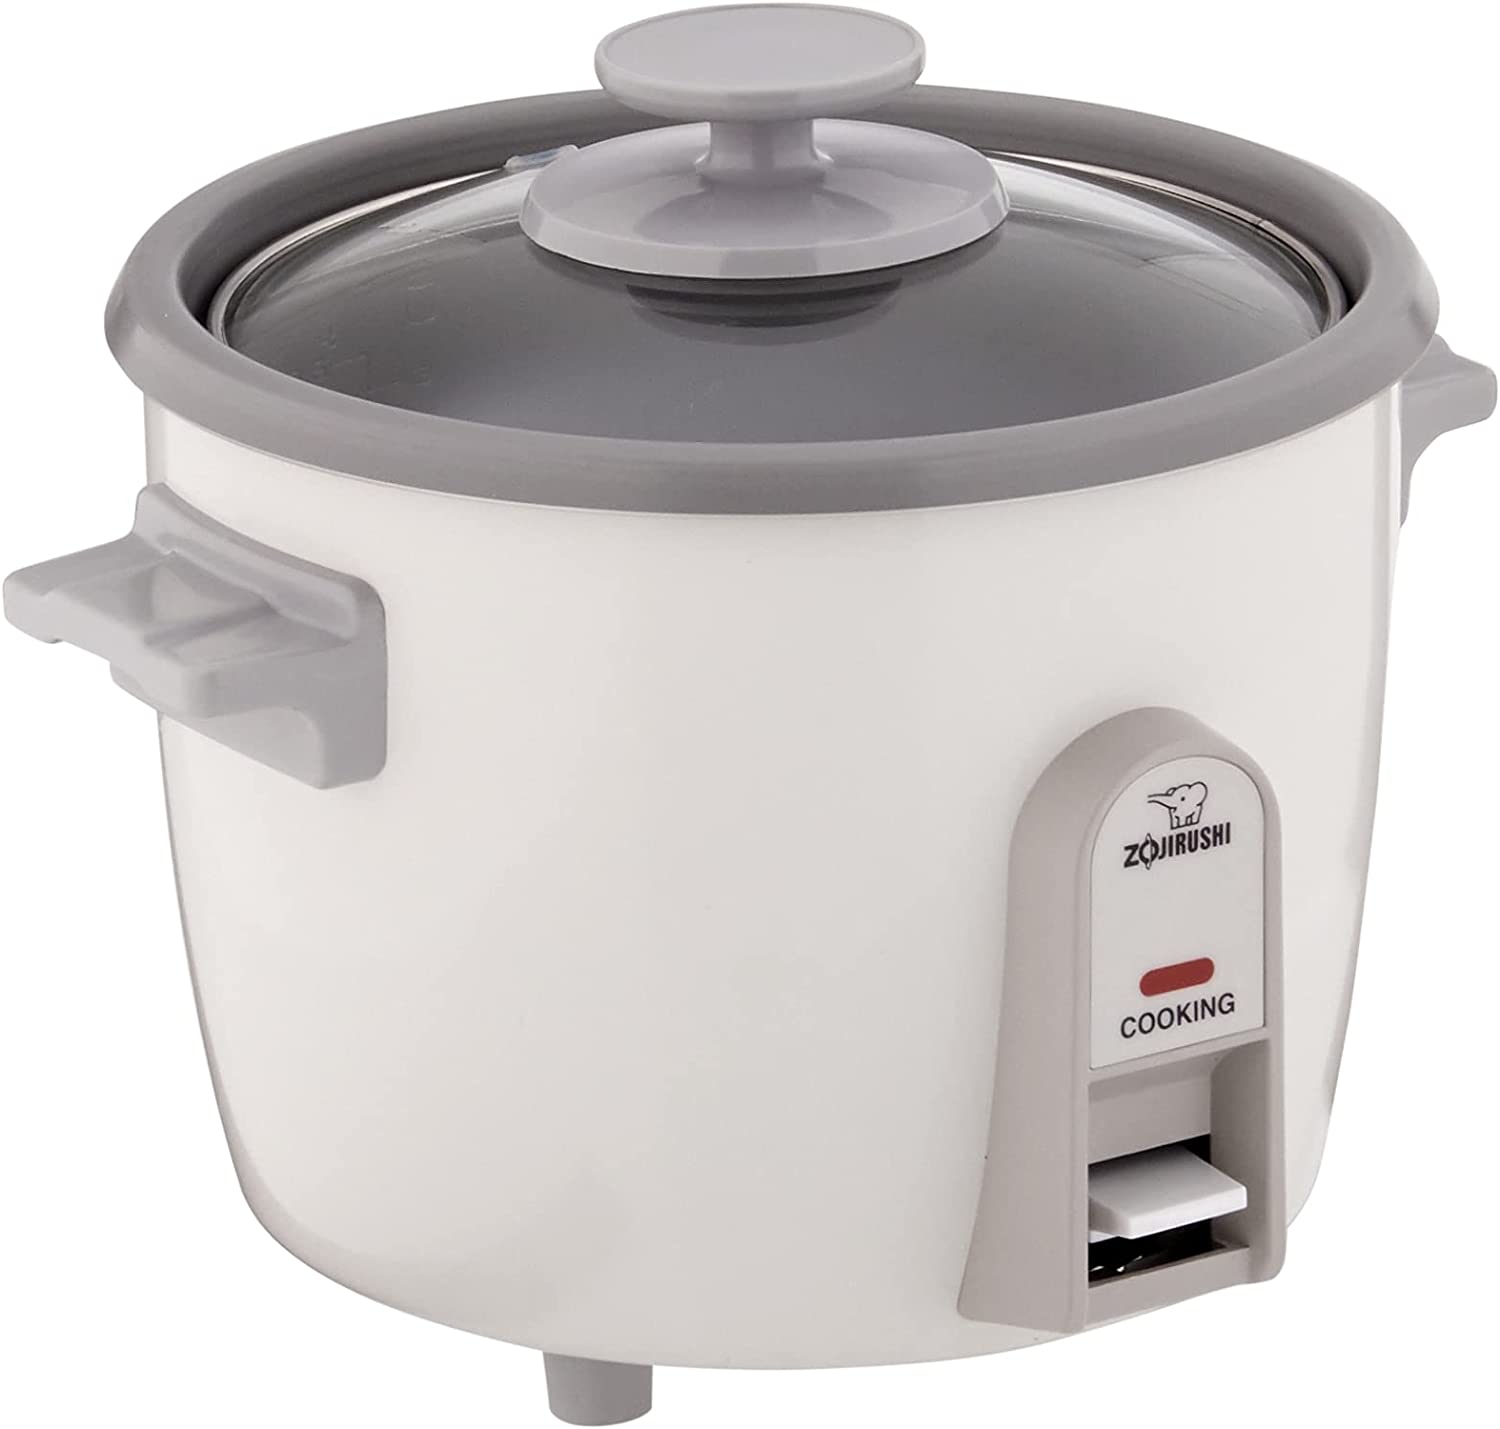  Rice Cooker - Rice Cooker With Steamer Basket